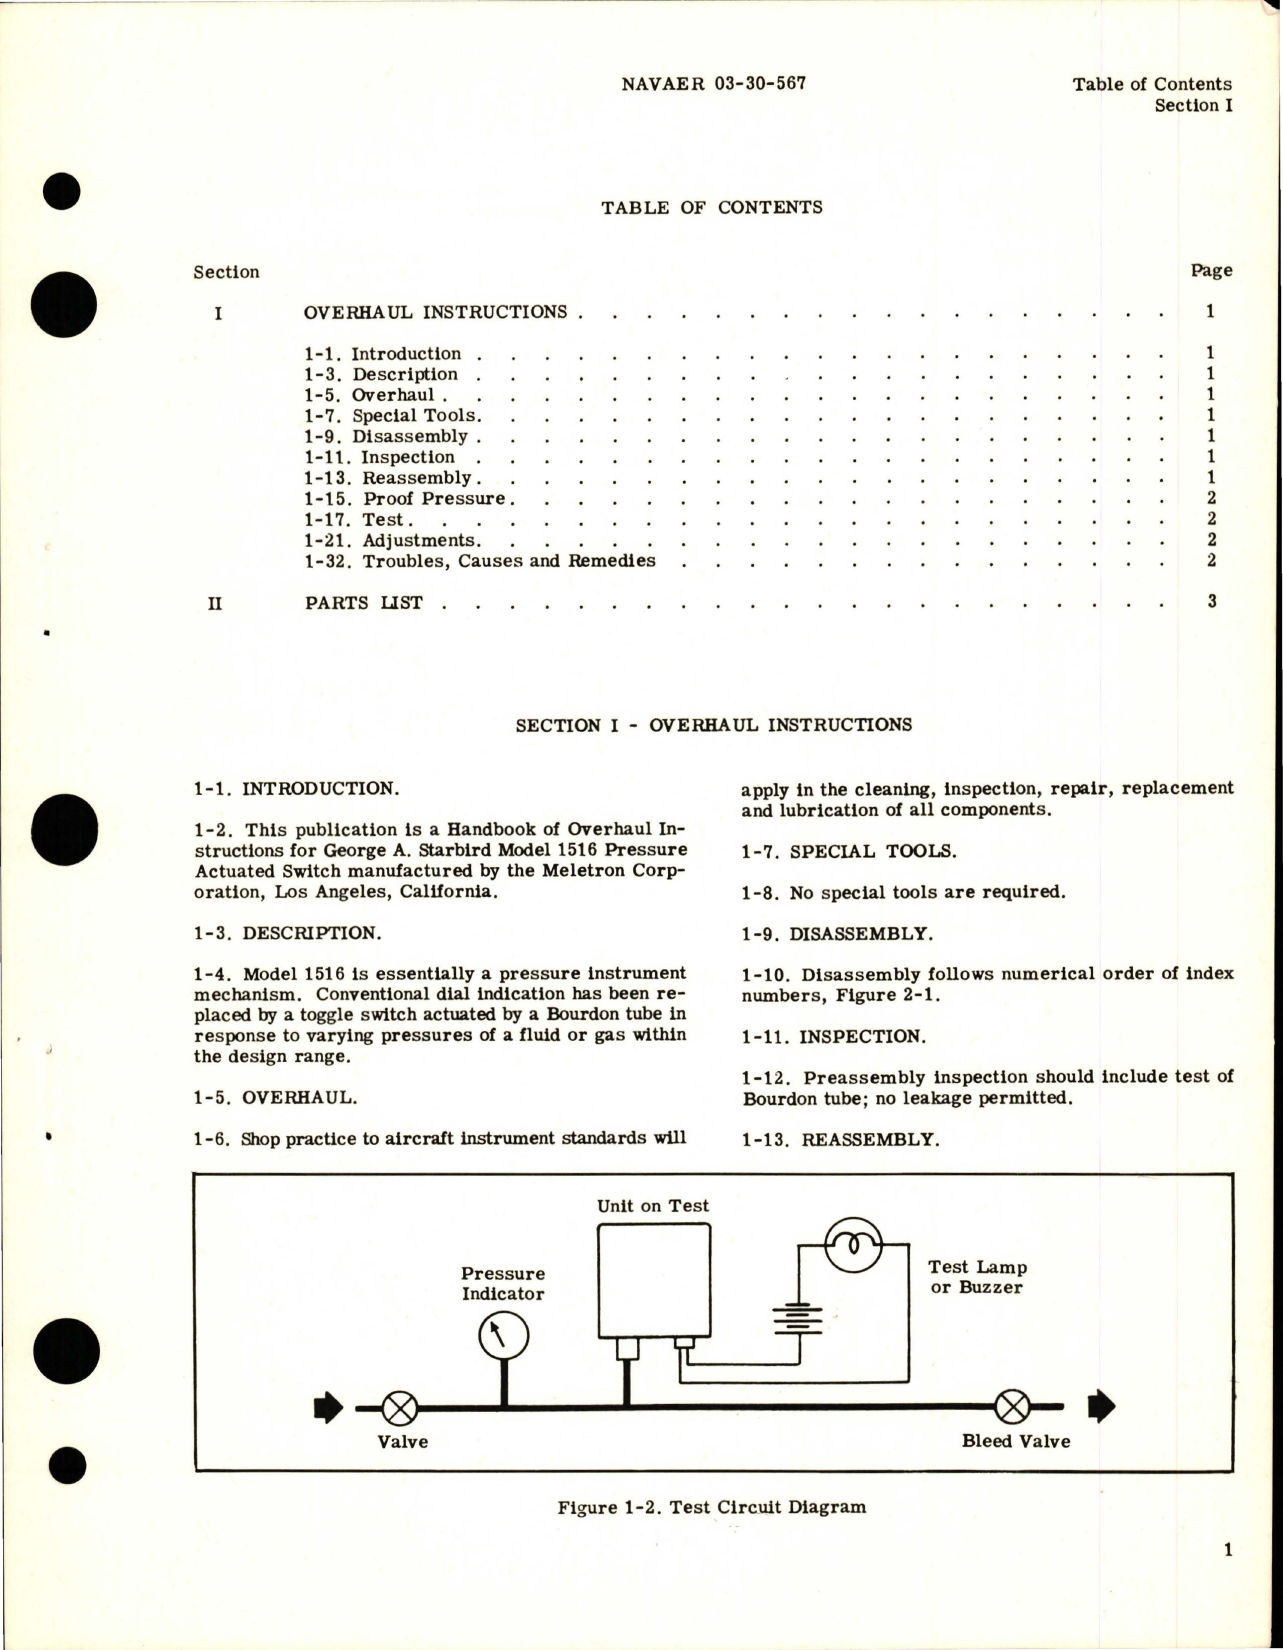 Sample page 5 from AirCorps Library document: Overhaul Instructions with Parts Catalog for Pressure Actuated Switch - Model 1516